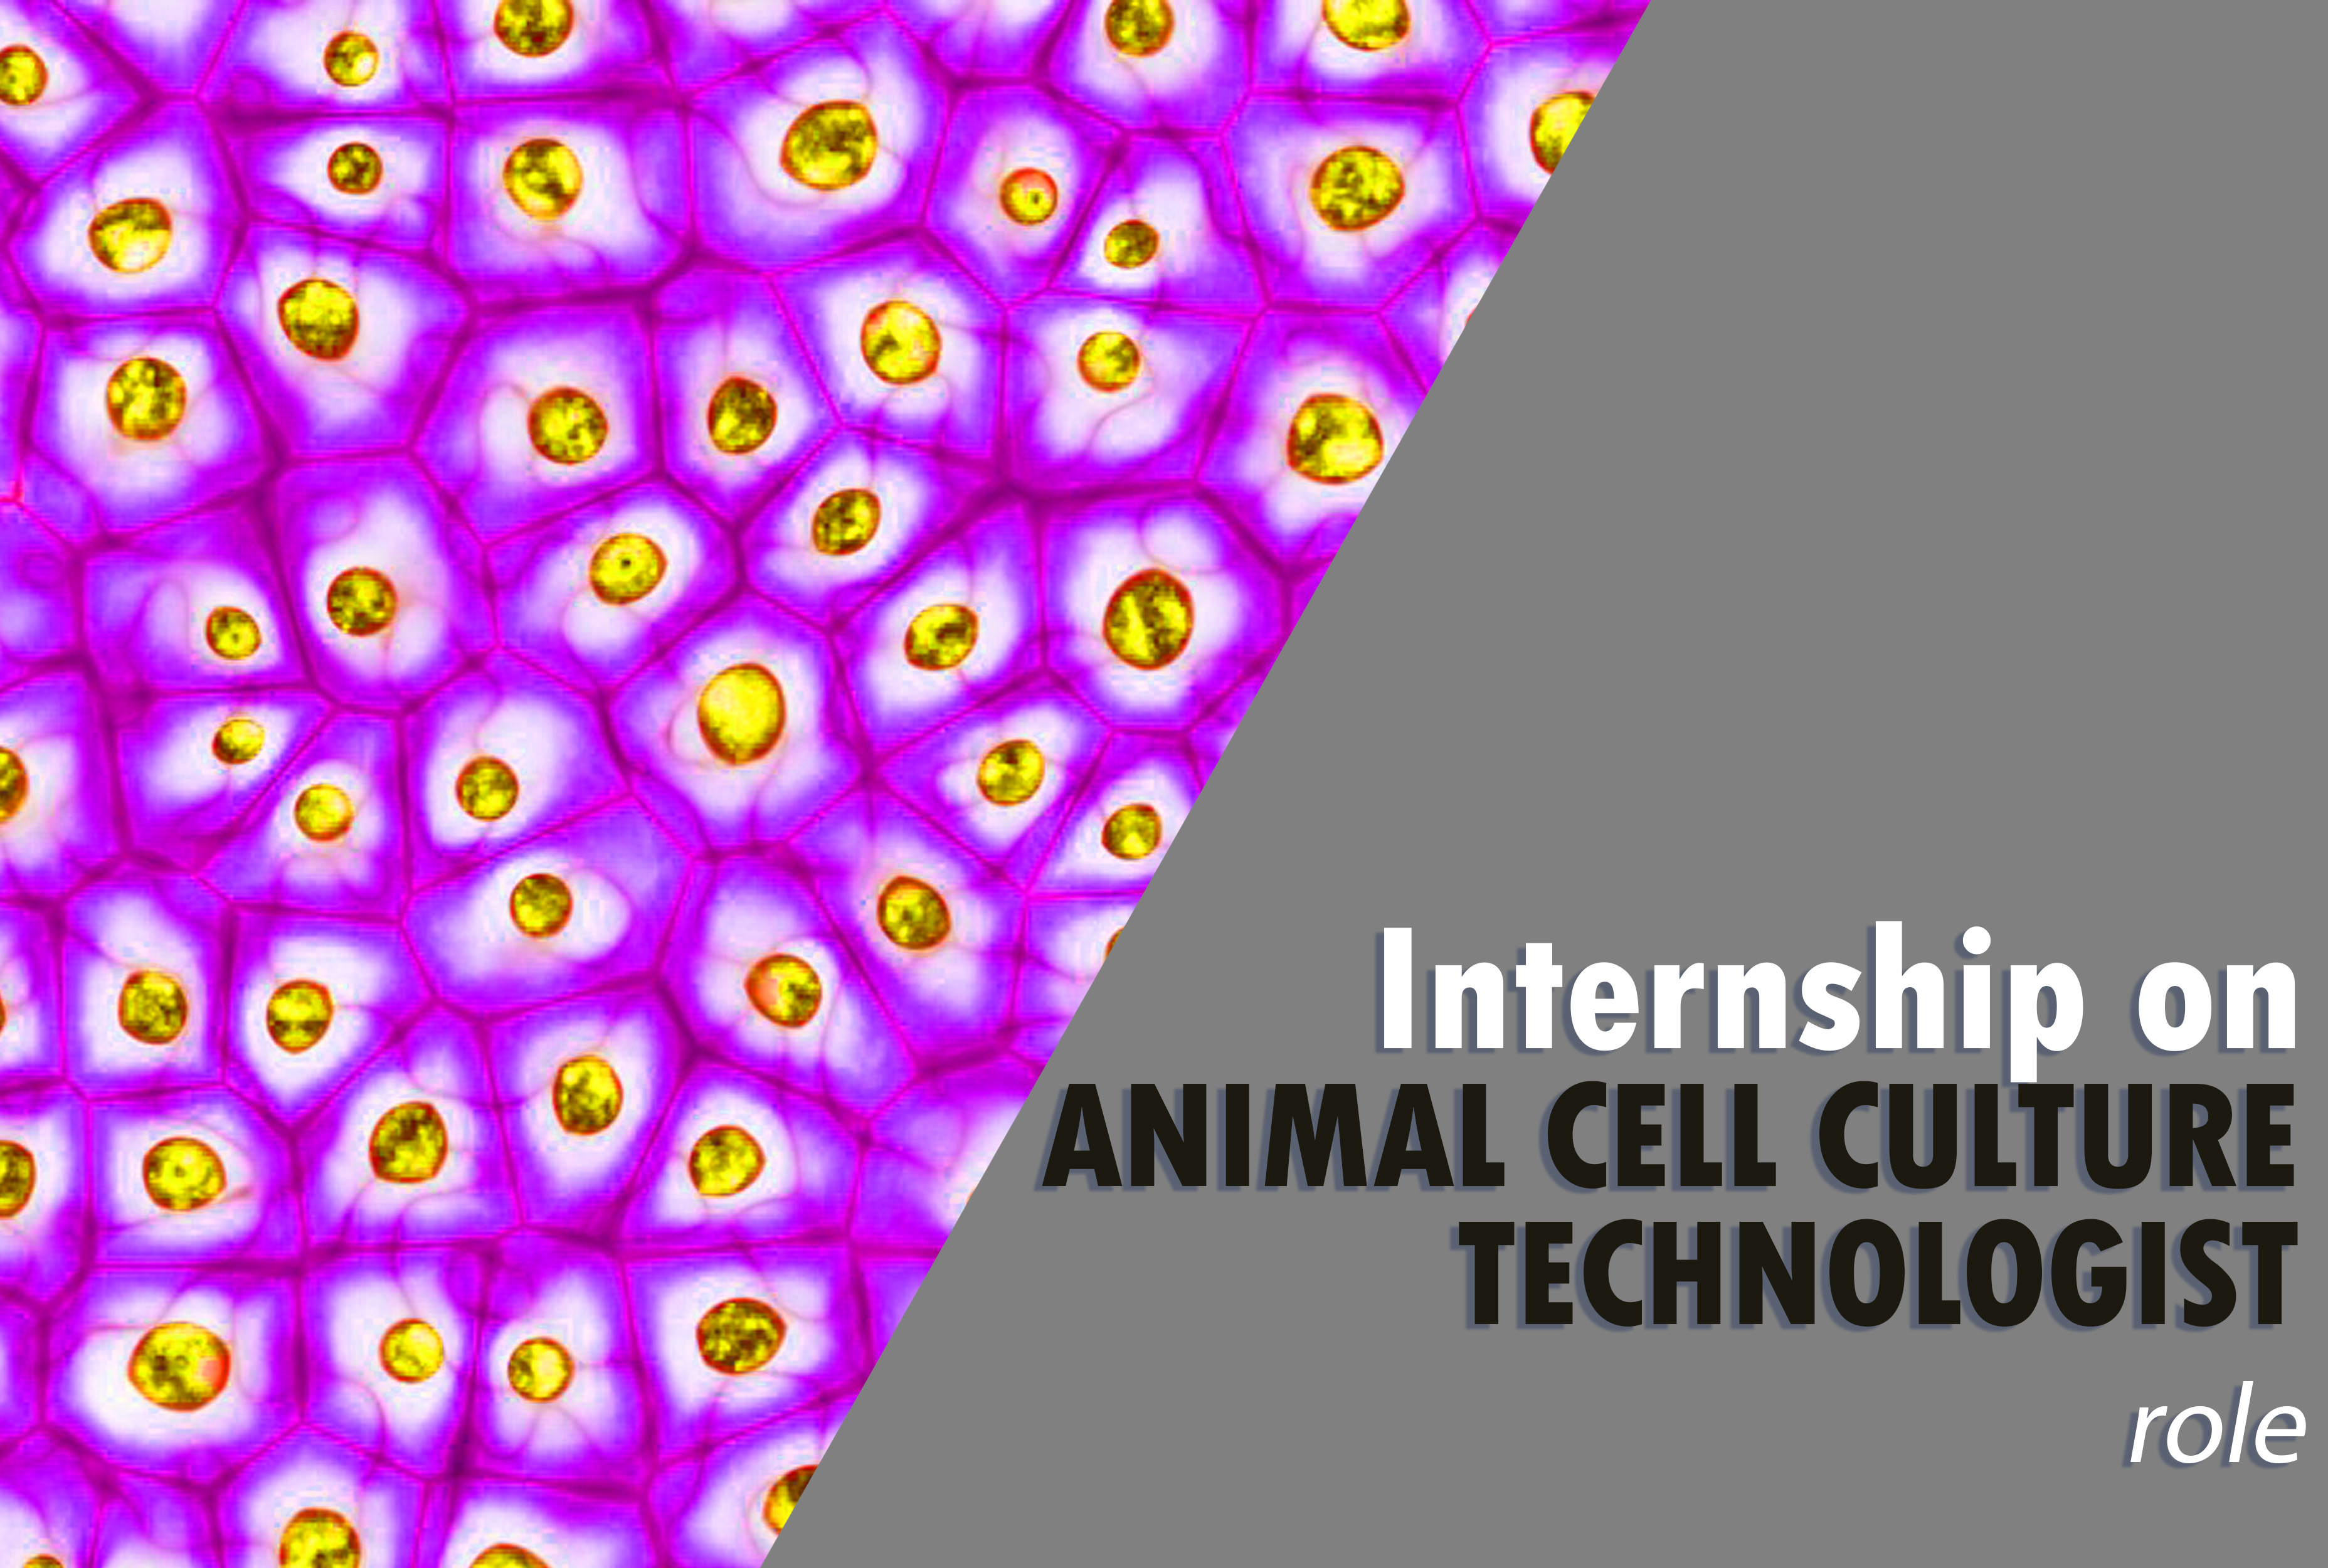 Internship on animal cell culture technologist role